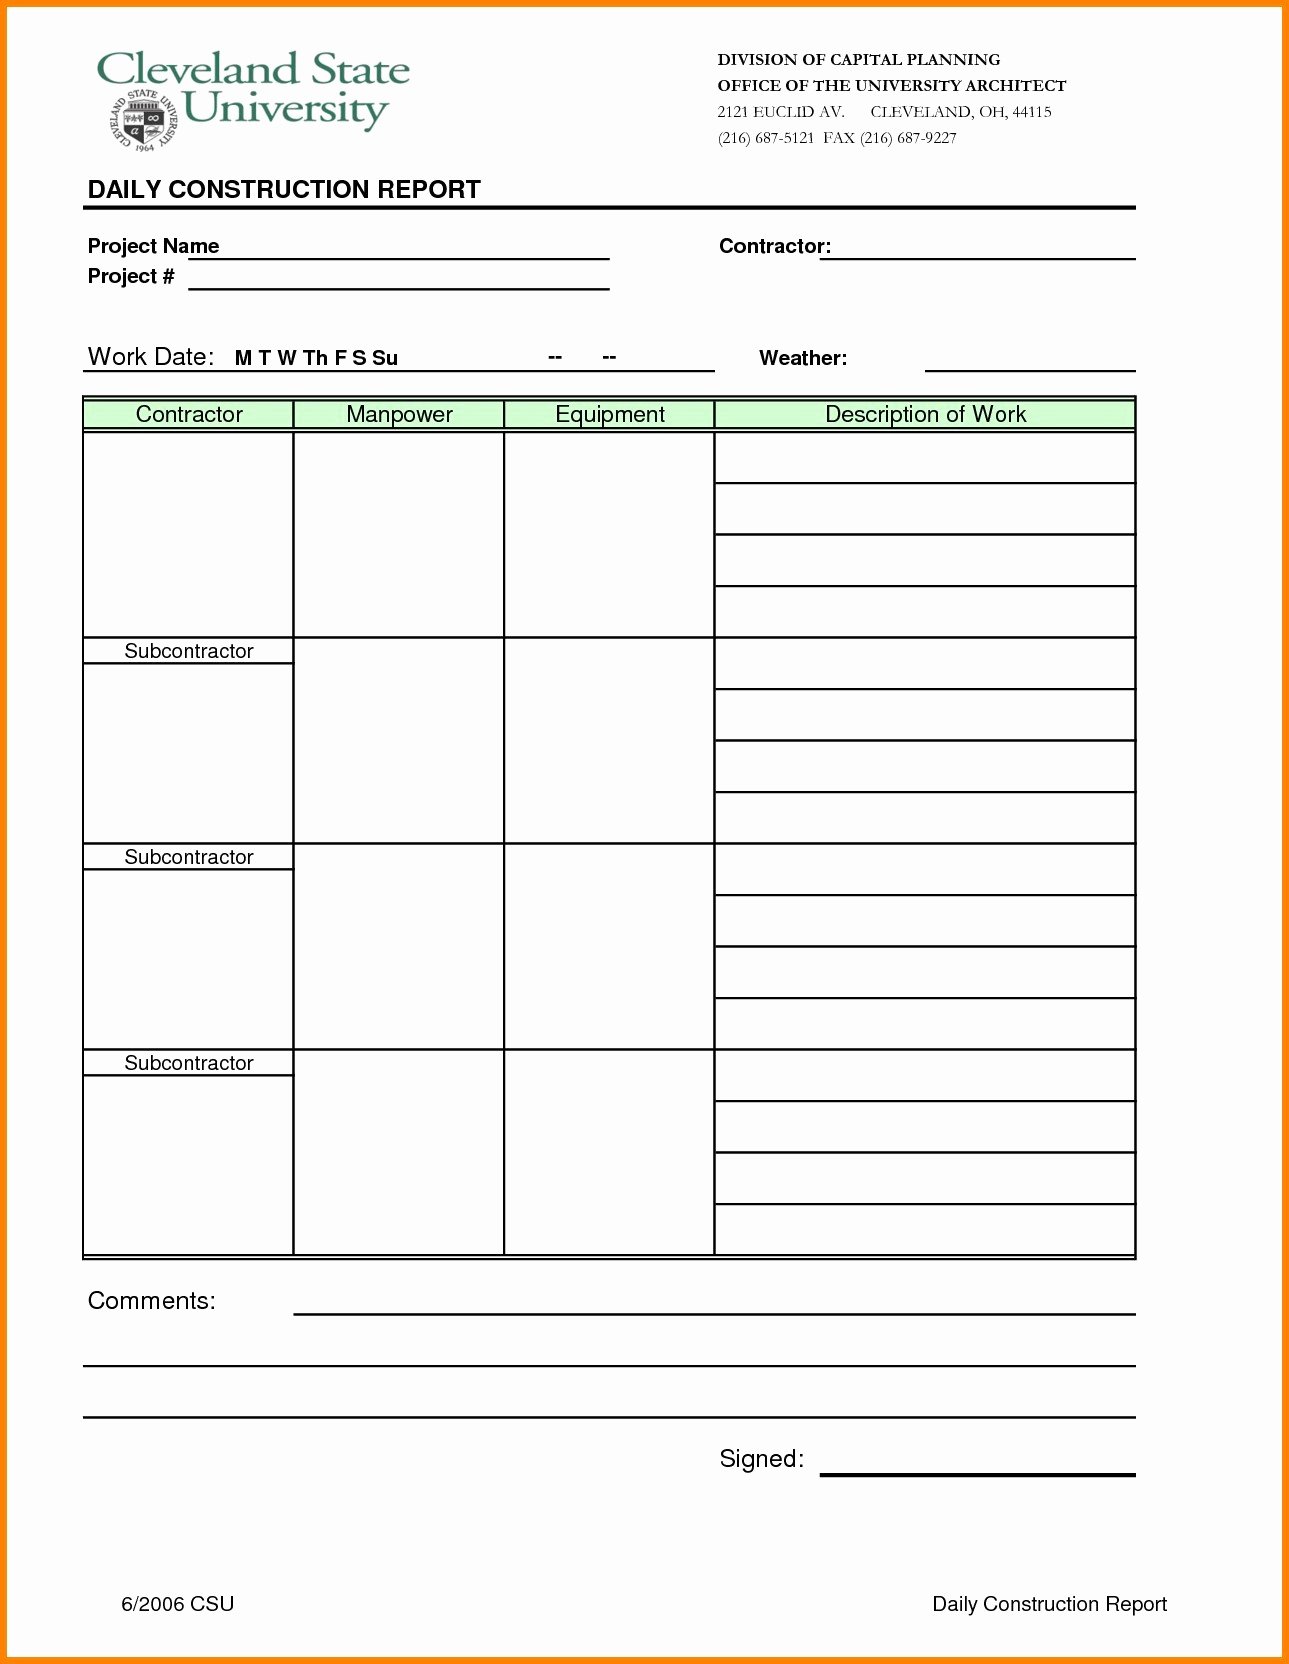 Weekly Activity Report Template Excel Awesome Daily Activity Report Template Excel – Free Daily